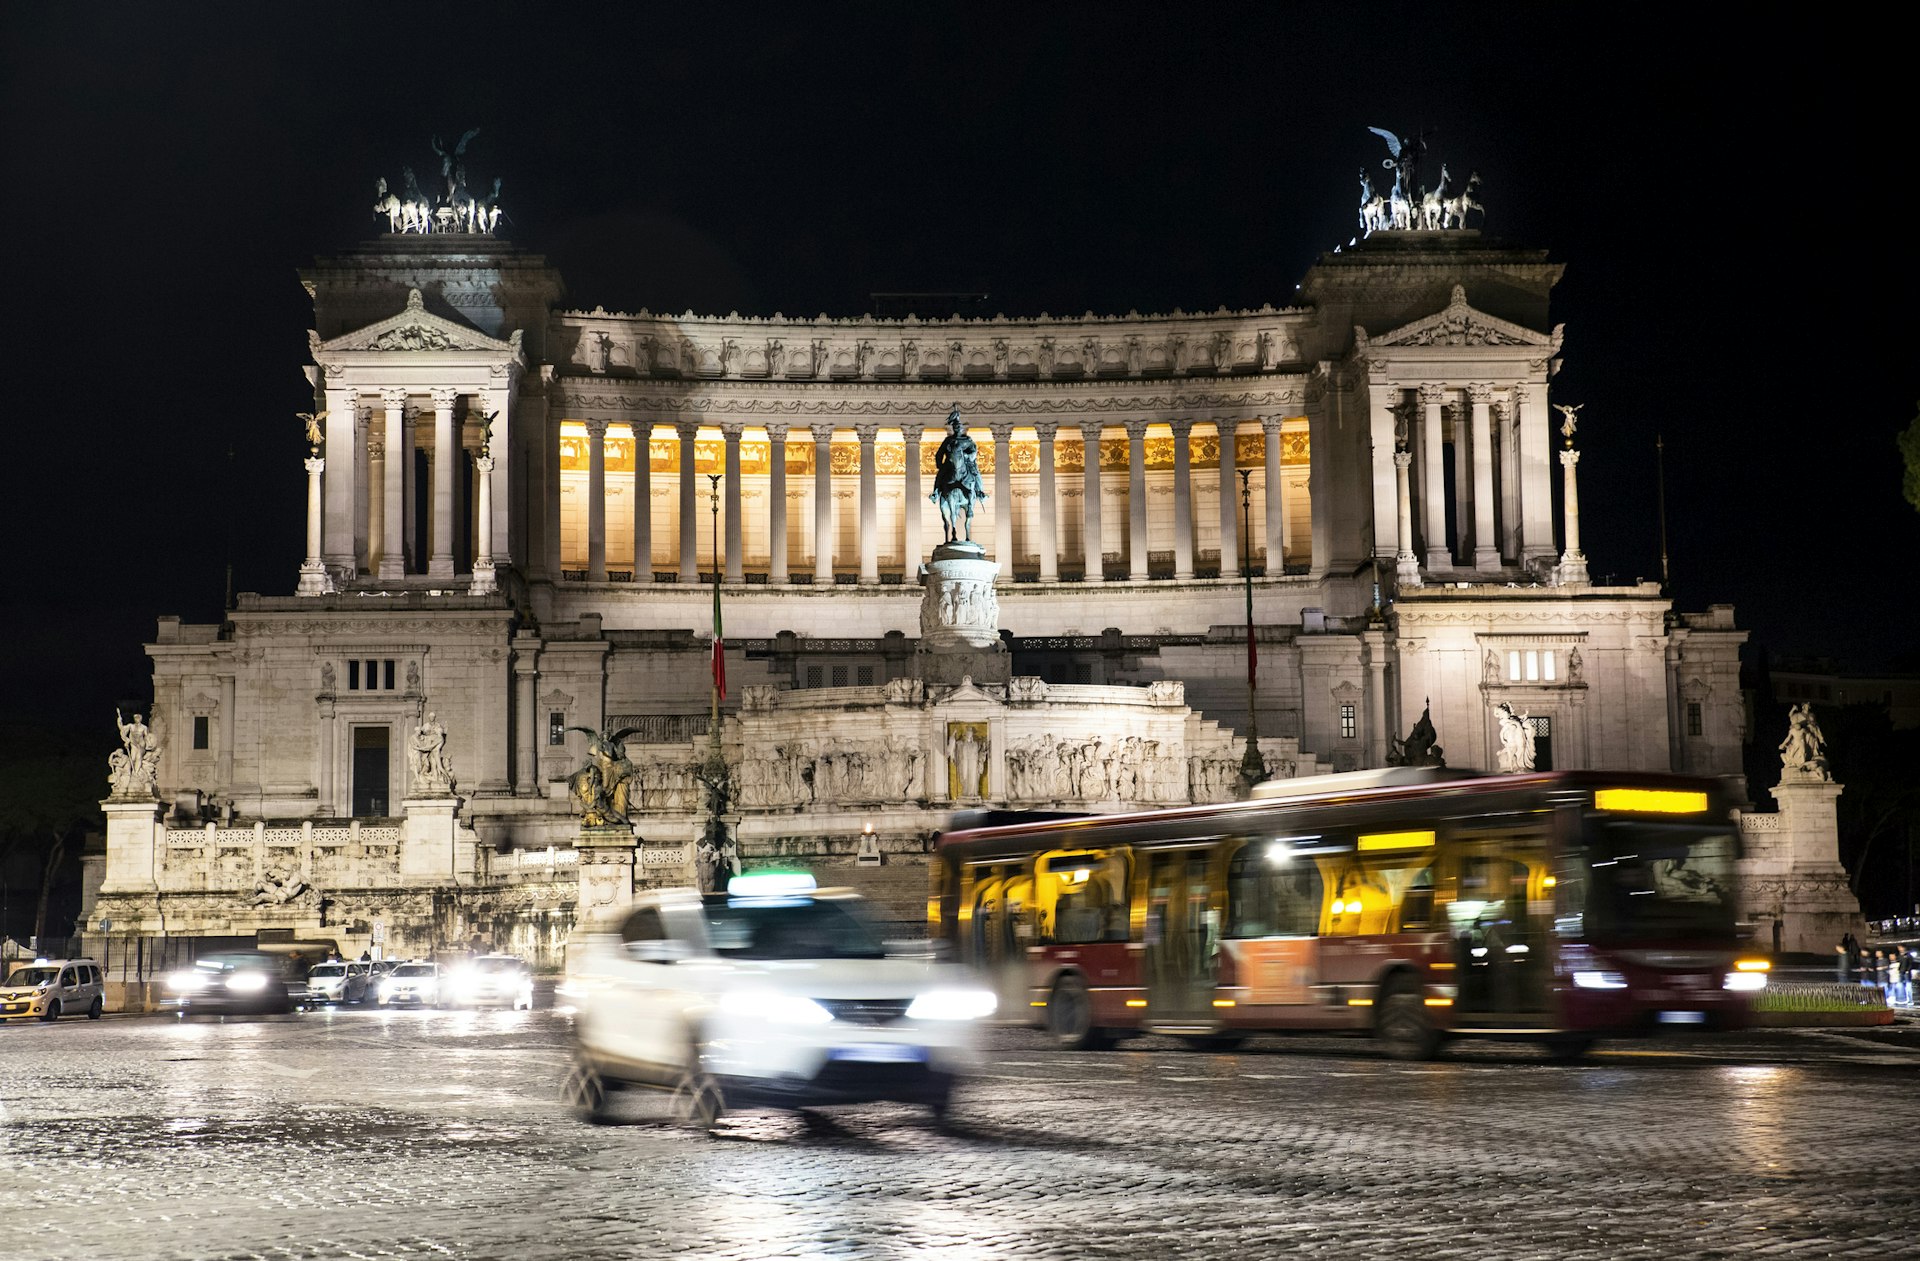 A taxi and a bus pass a huge, grand building lit up at night in Rome